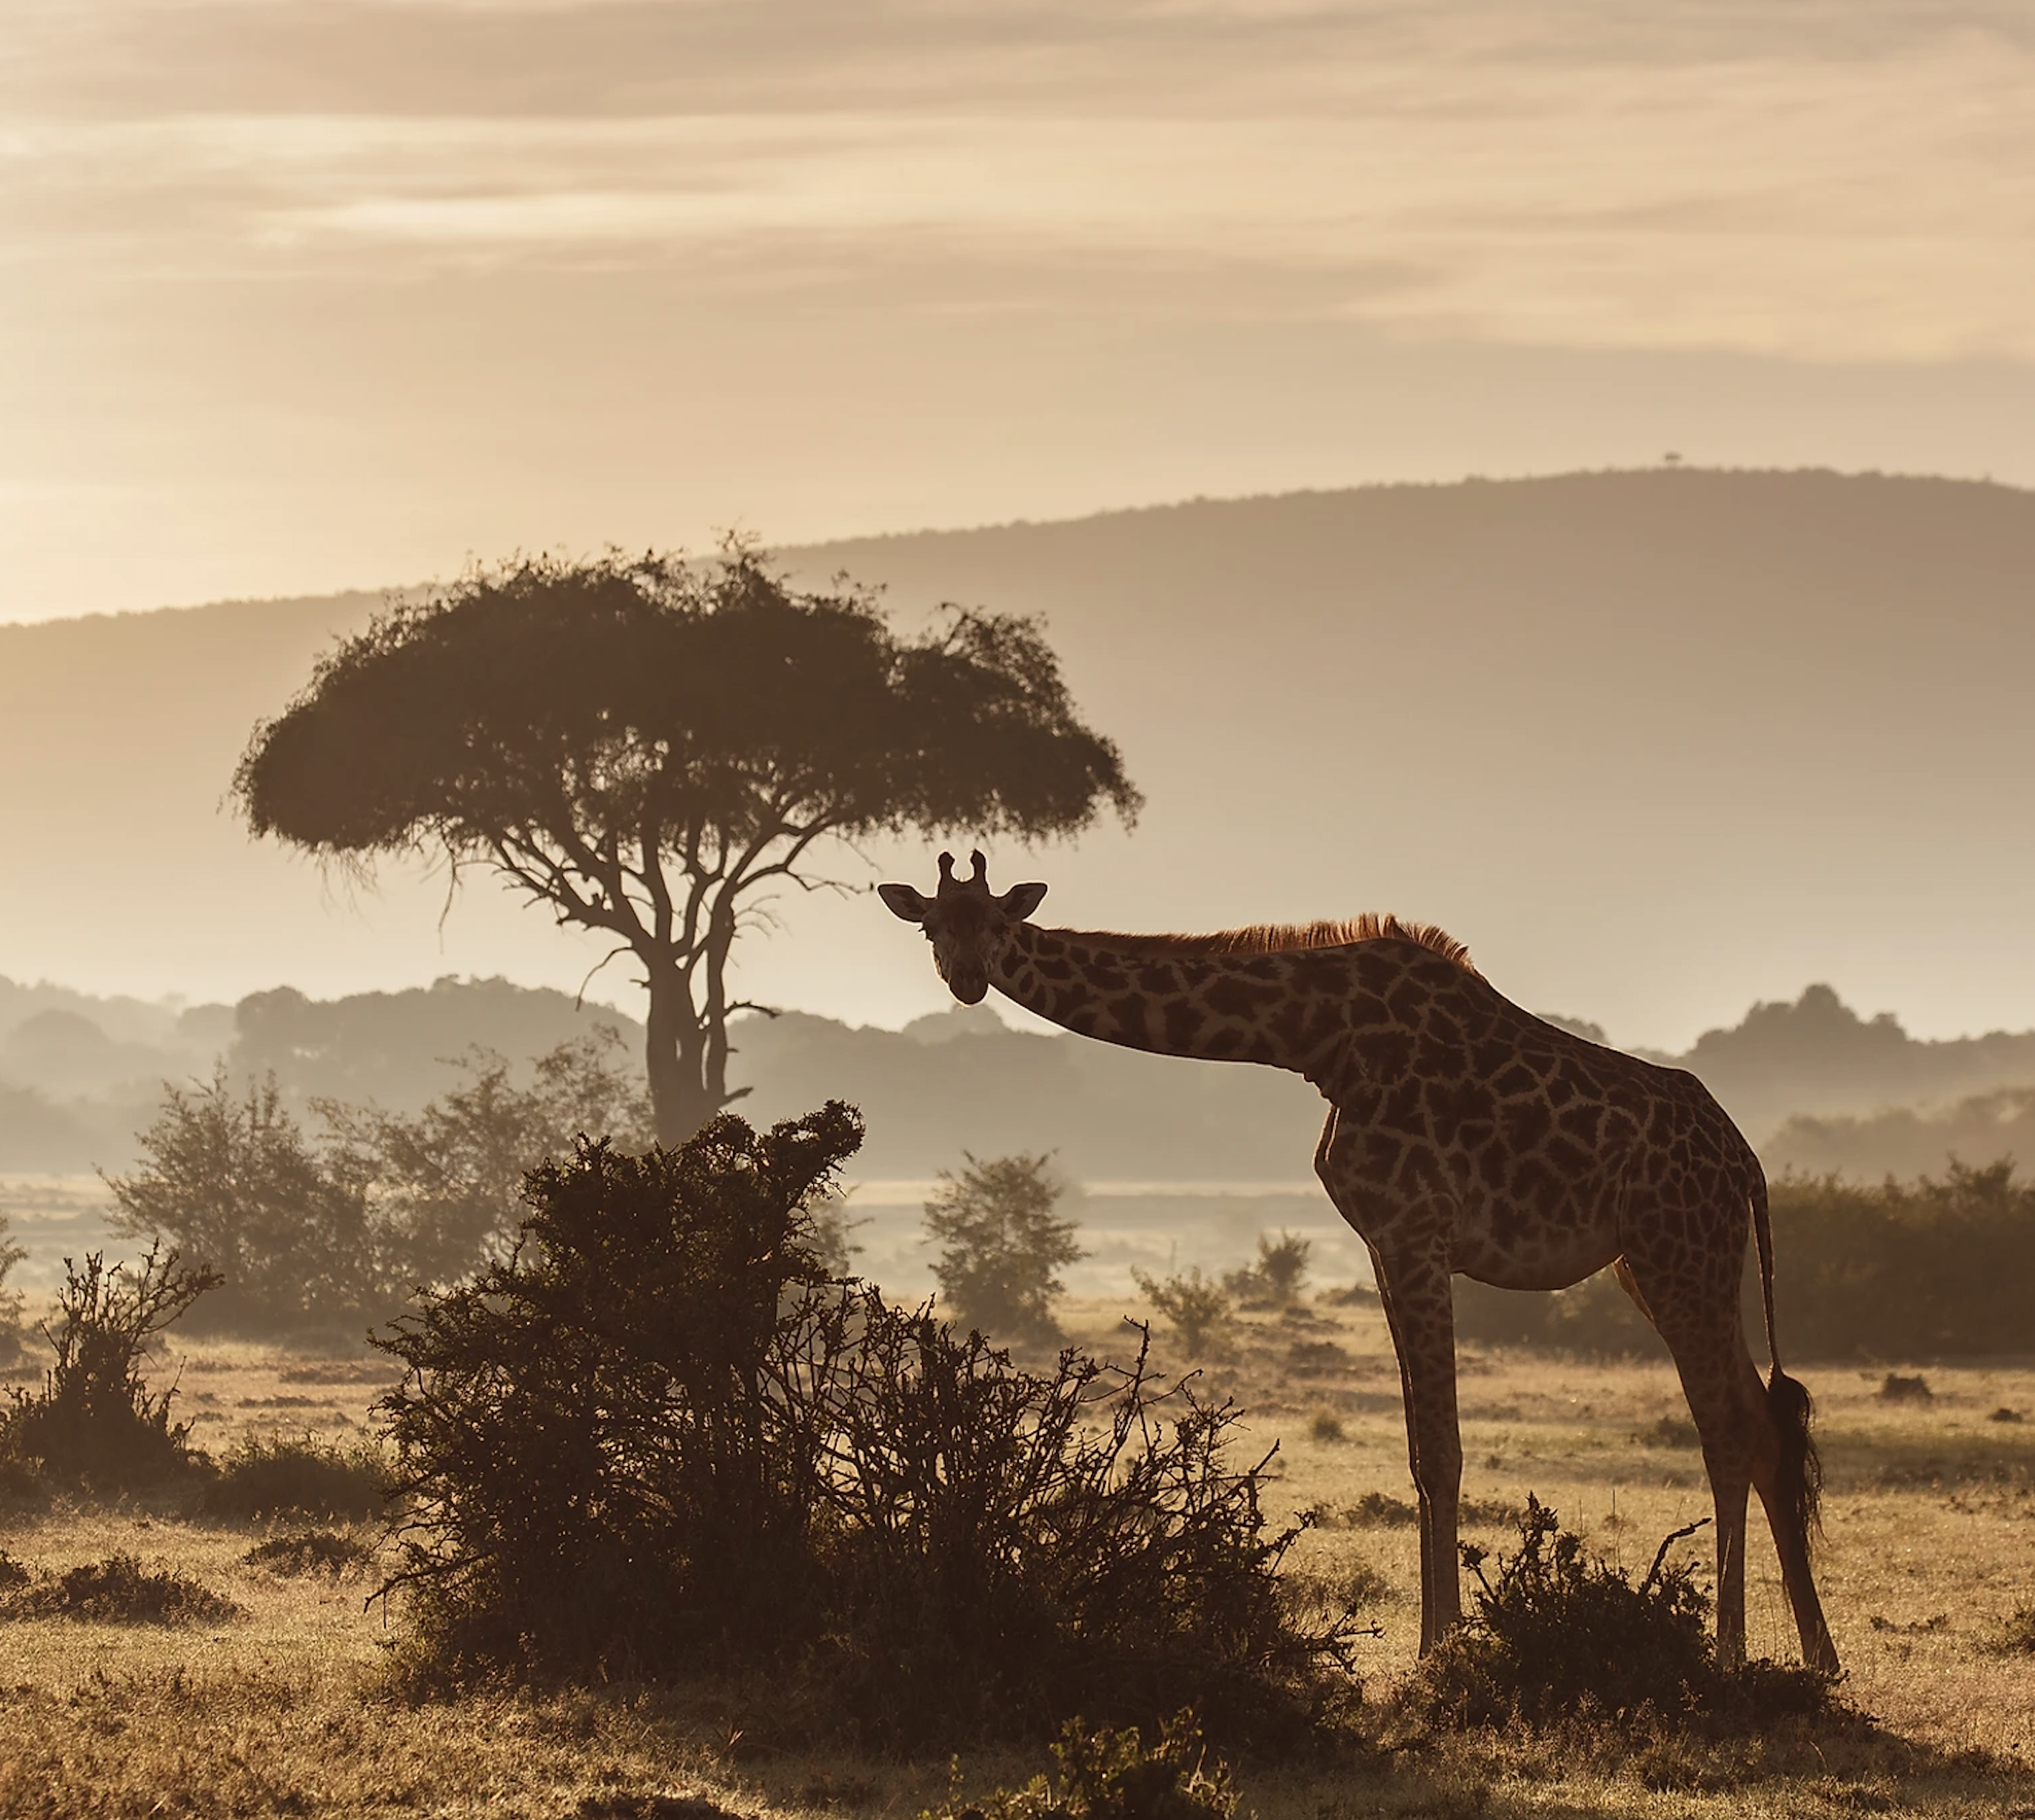 A giraffe dips its head to look at the camera to illustrate the SORORAL x Kenya adventure with SORORAL a women-friendly tour operator.